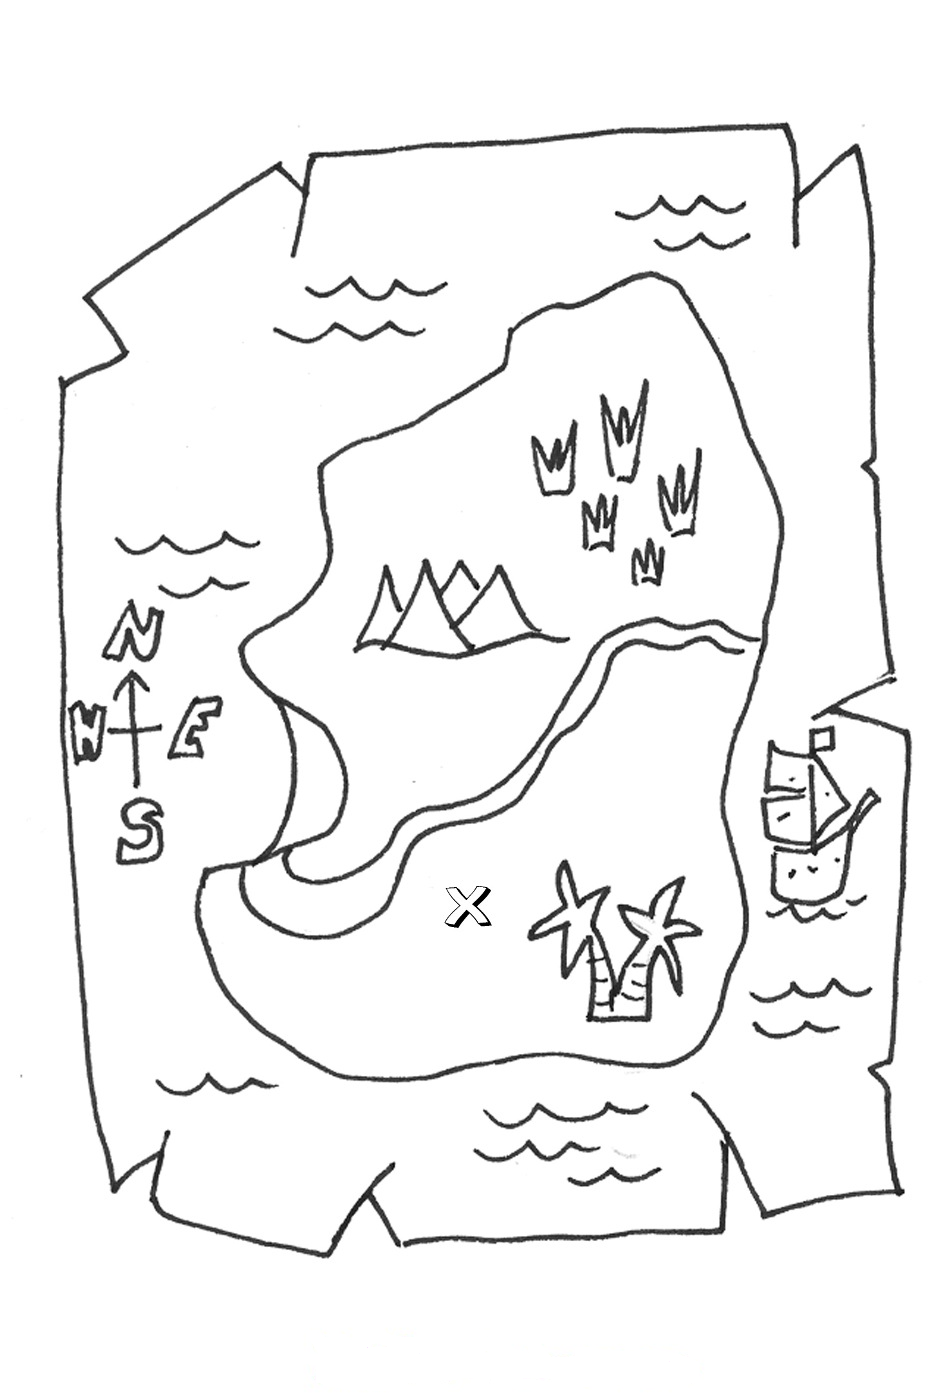 Download Pirate Map Coloring Pages Printable - Coloring Home